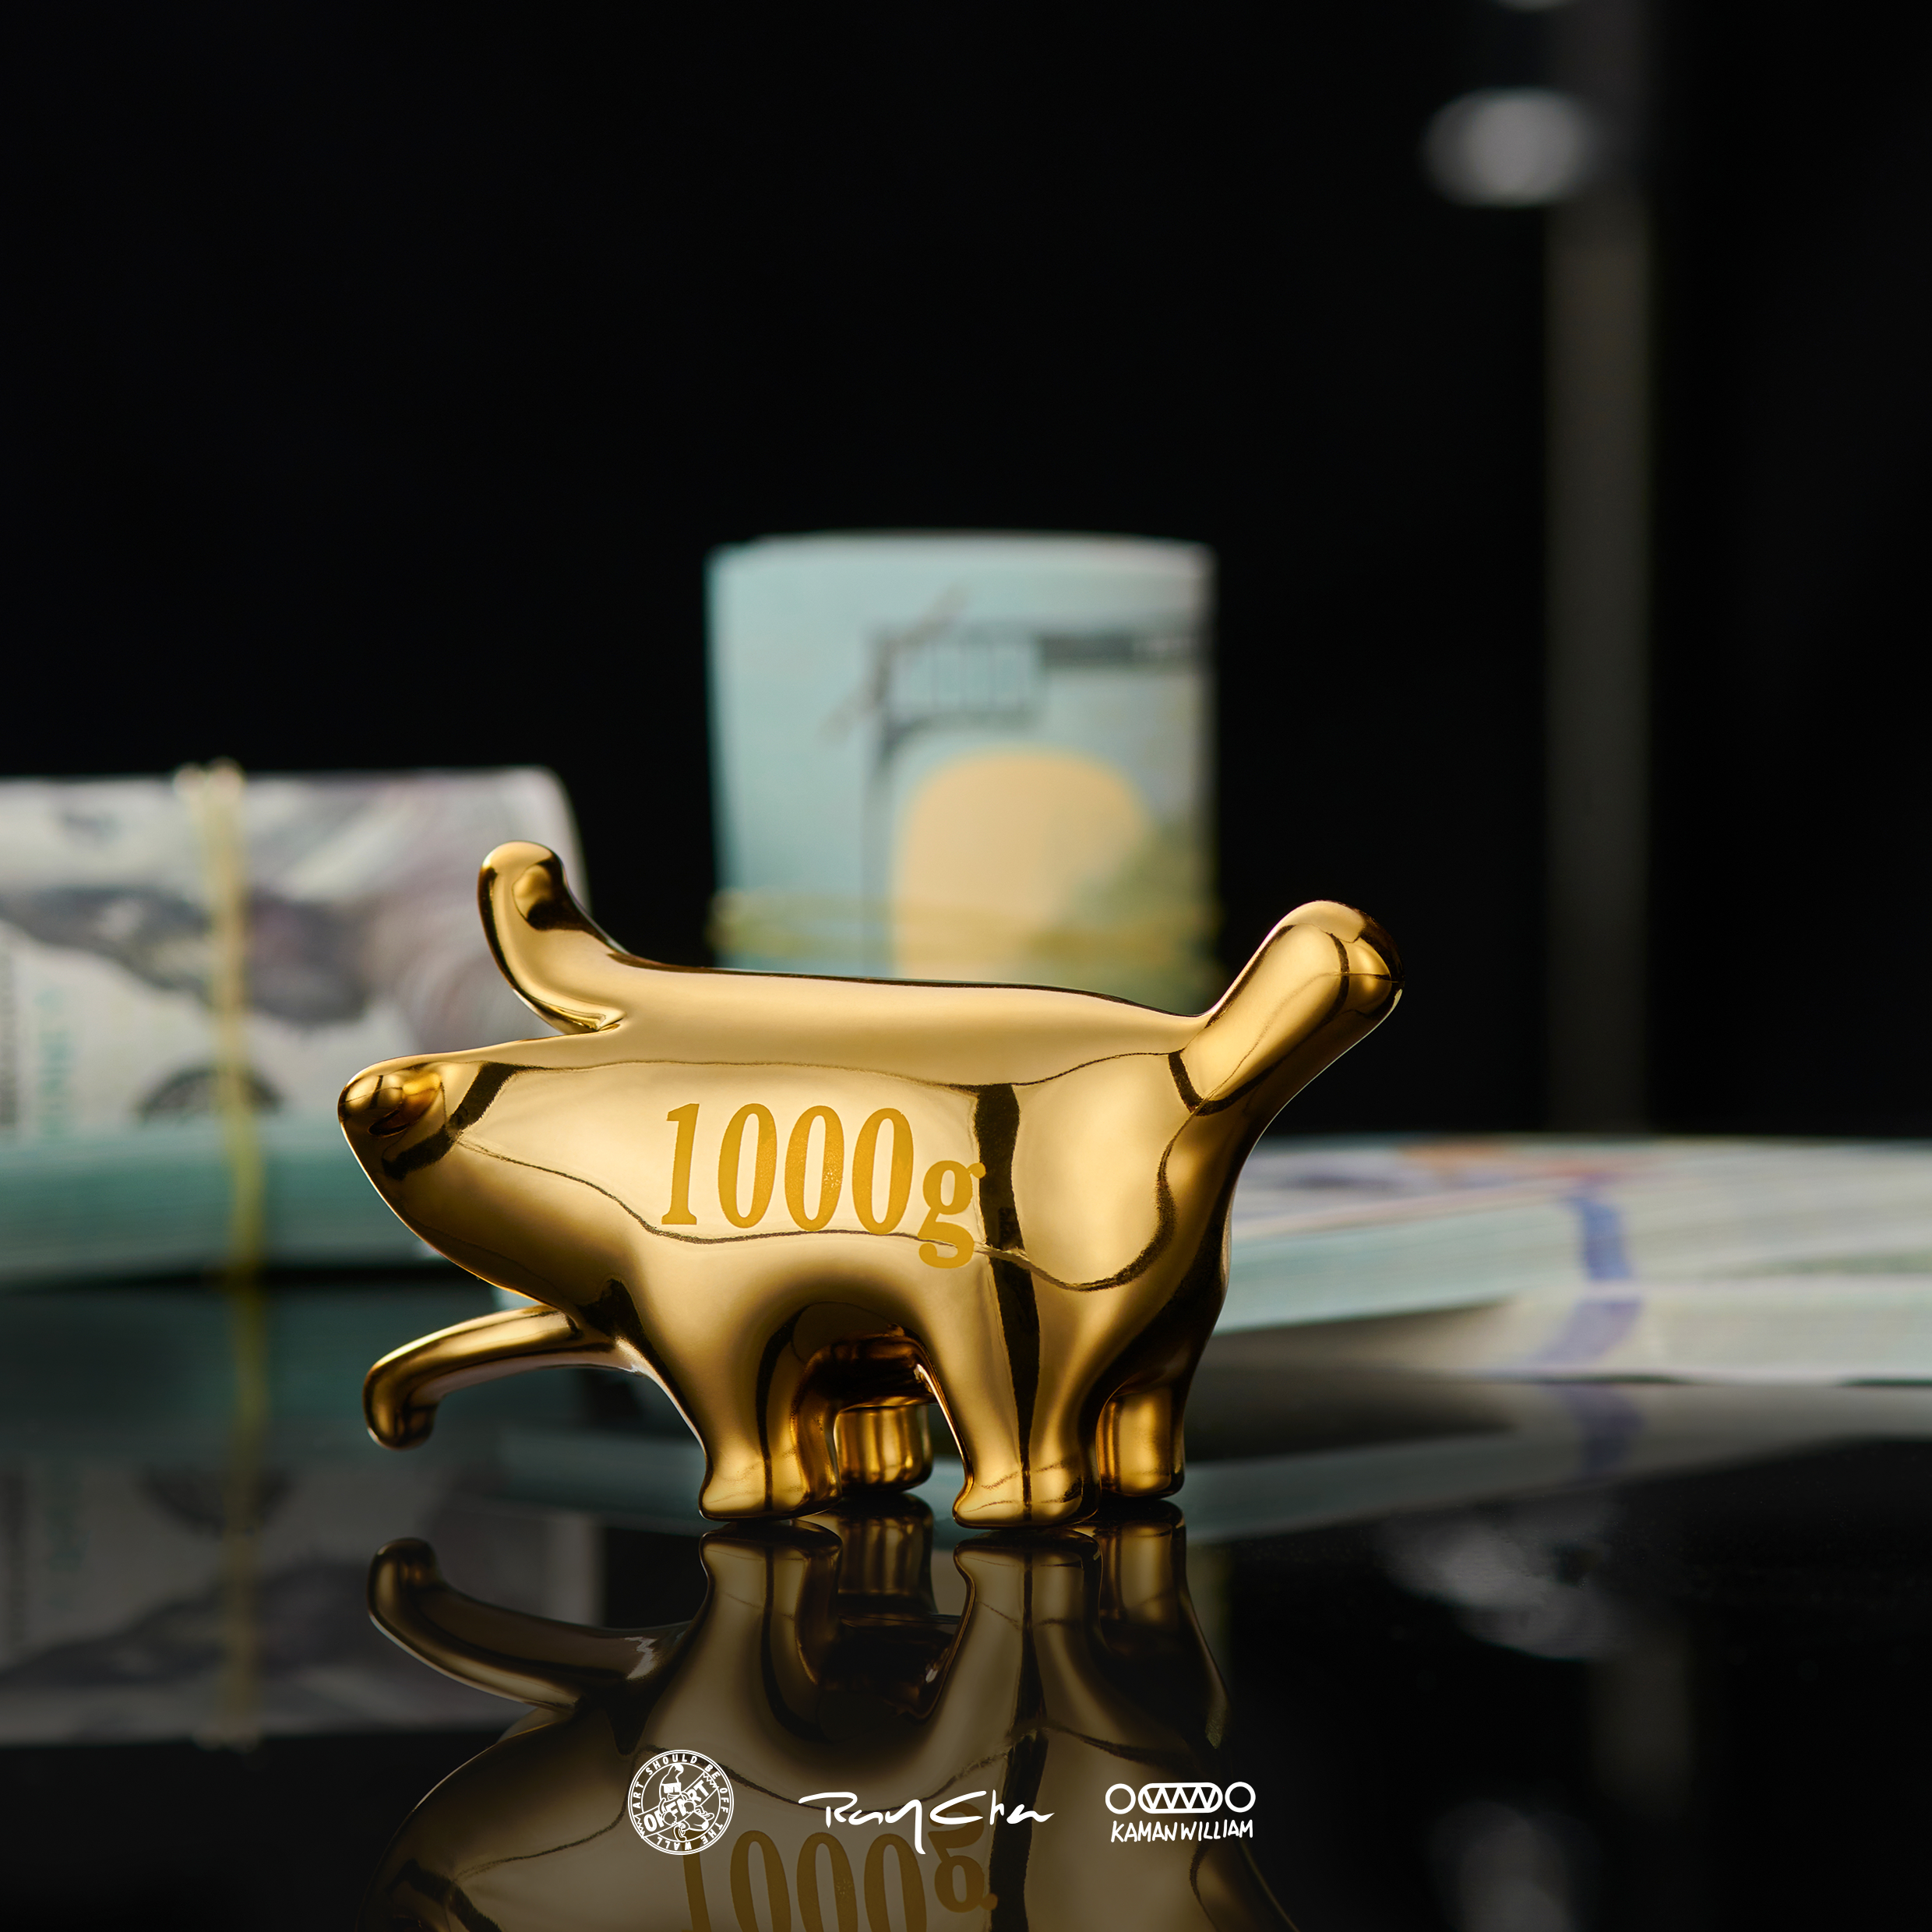 A gold dog figurine by OFFART X Kamanwillam, featuring a detachable banana pulp detail. Reflects Strangecat Toys' blind box and art toy store essence.